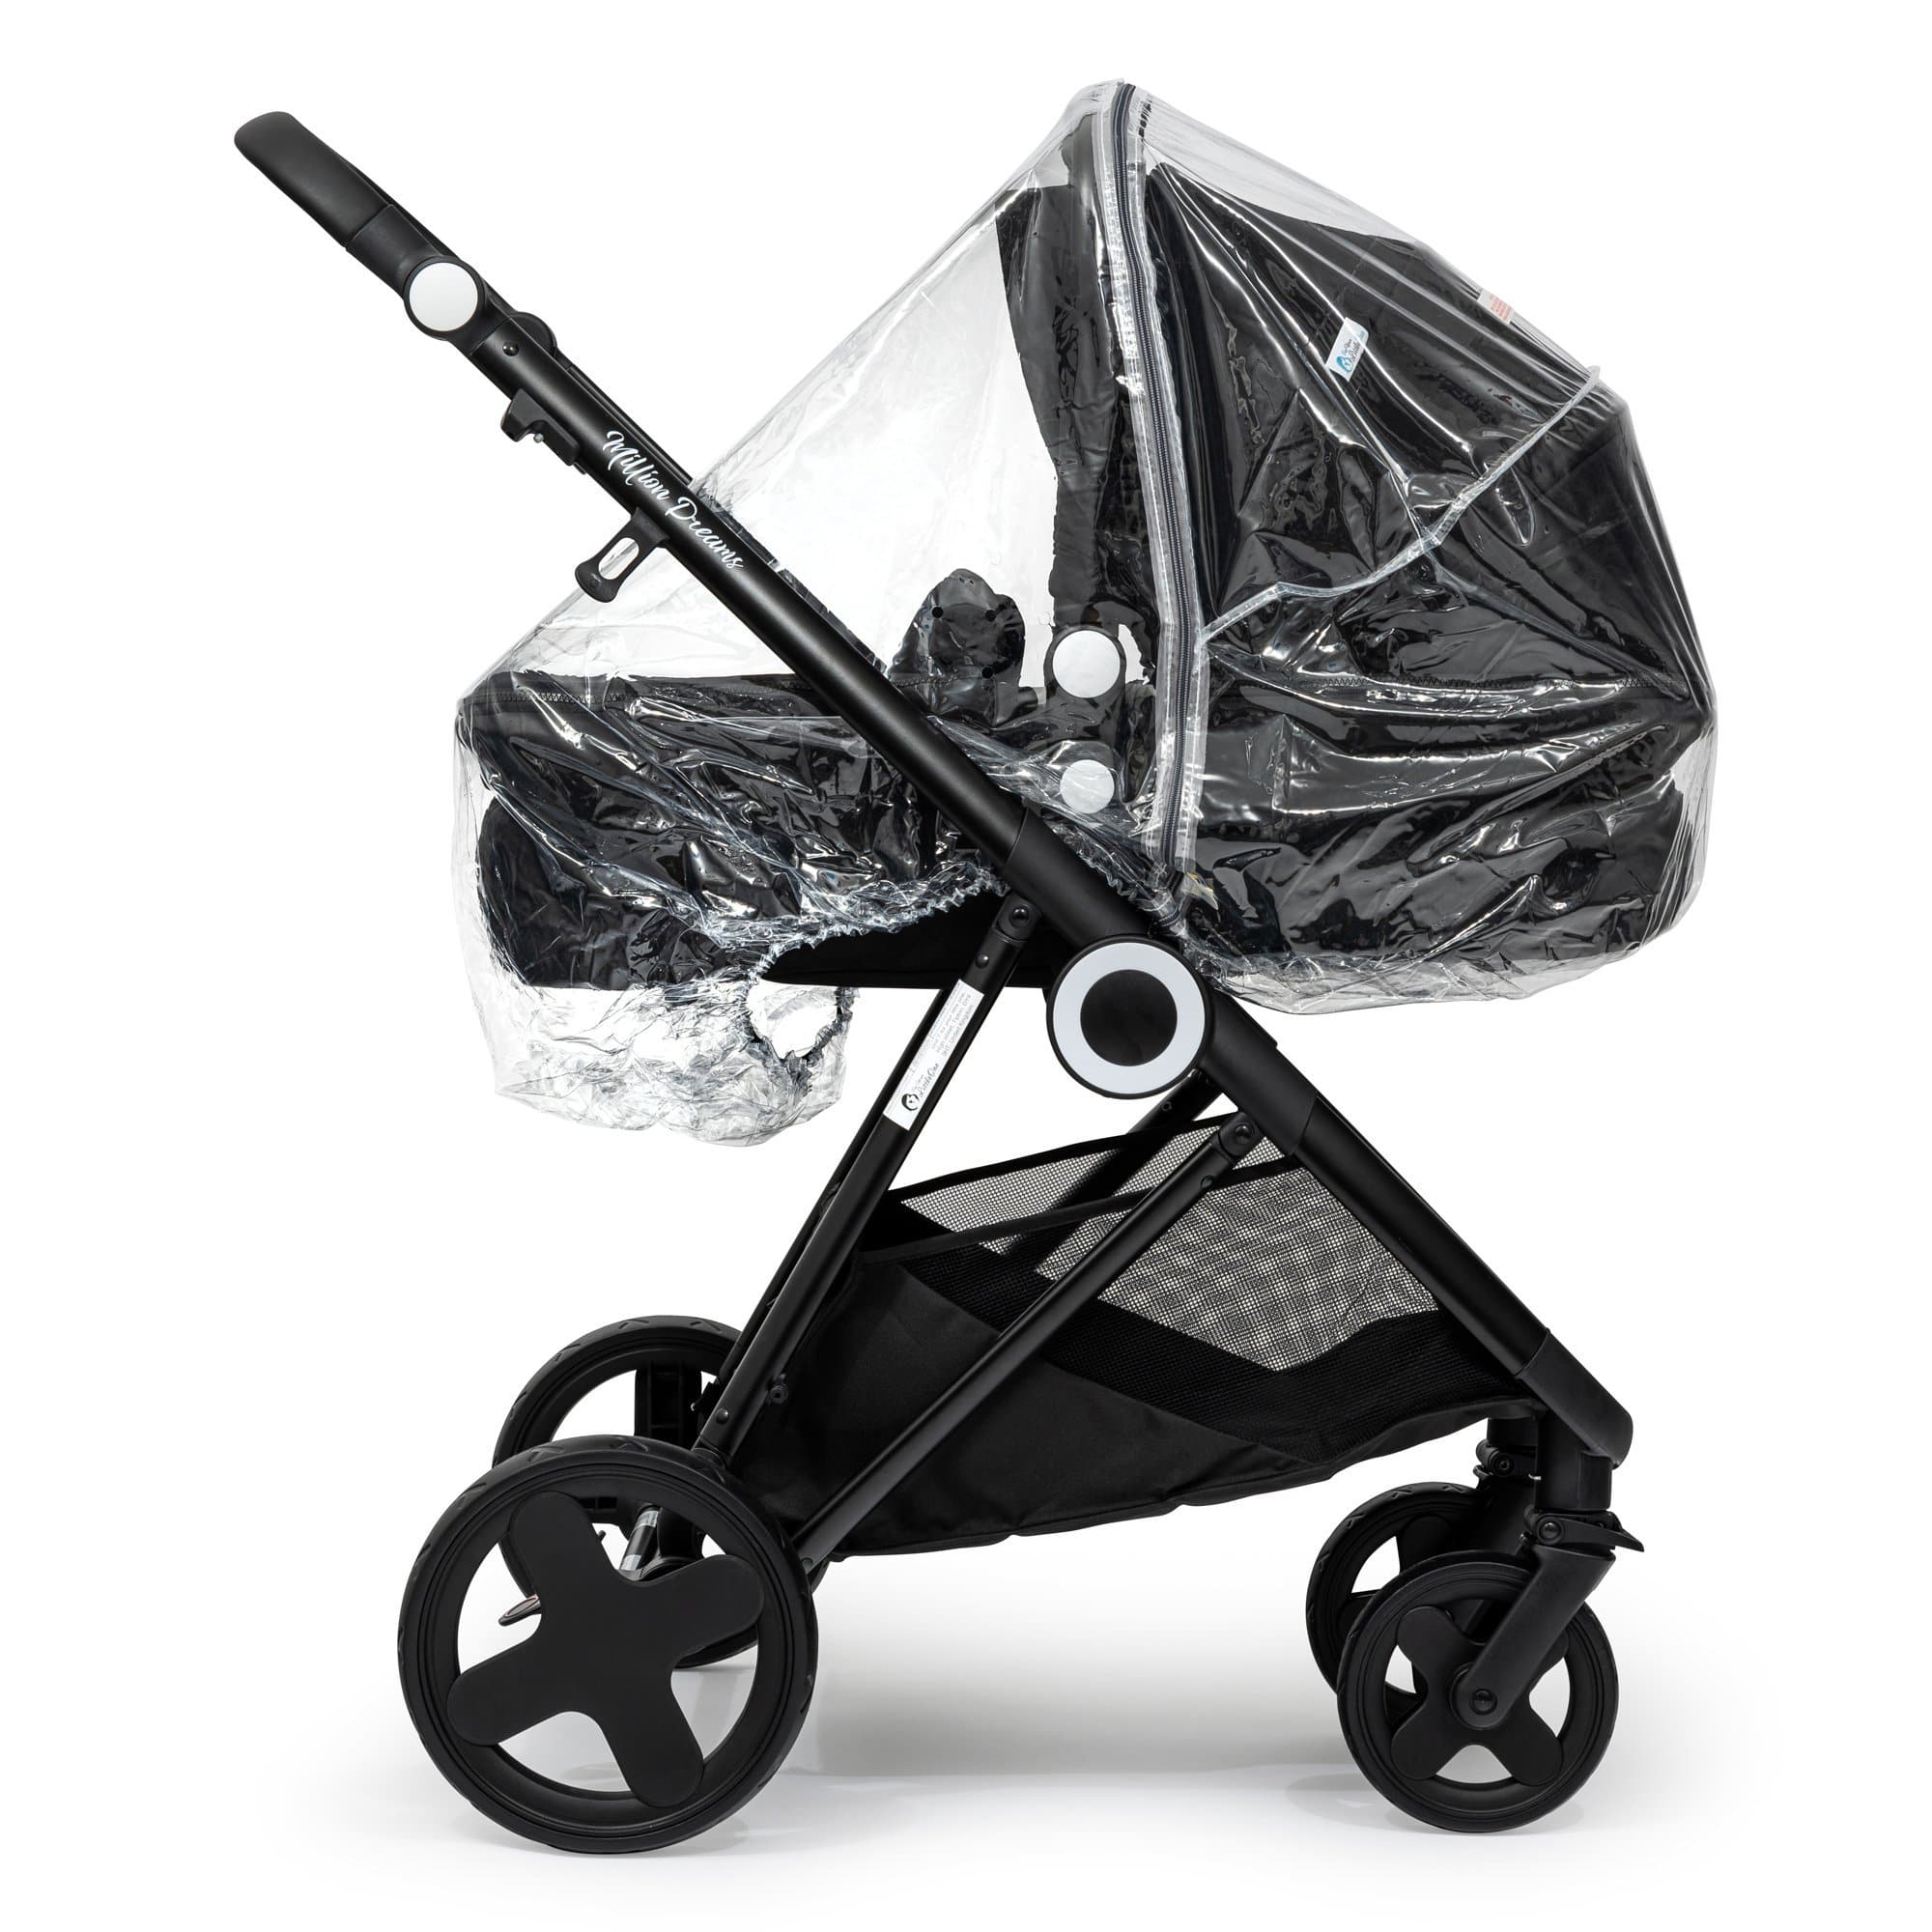 2 in 1 Rain Cover Compatible with Petite Star - Fits All Models - For Your Little One